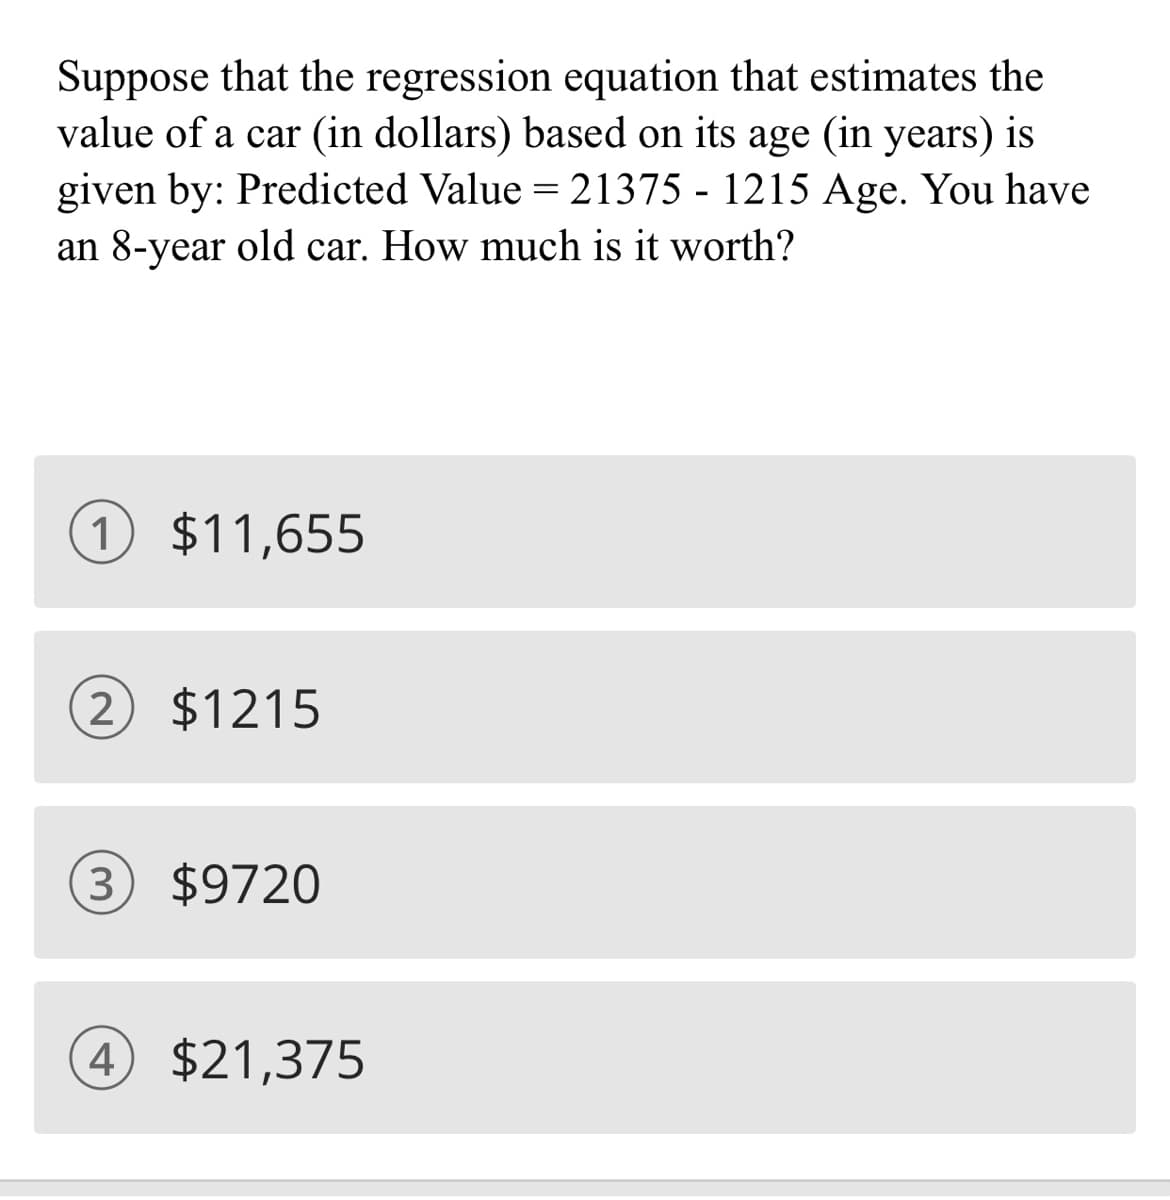 Suppose that the regression equation that estimates the
value of a car (in dollars) based on its age (in years) is
given by: Predicted Value = 21375 - 1215 Age. You have
an 8-year old car. How much is it worth?
